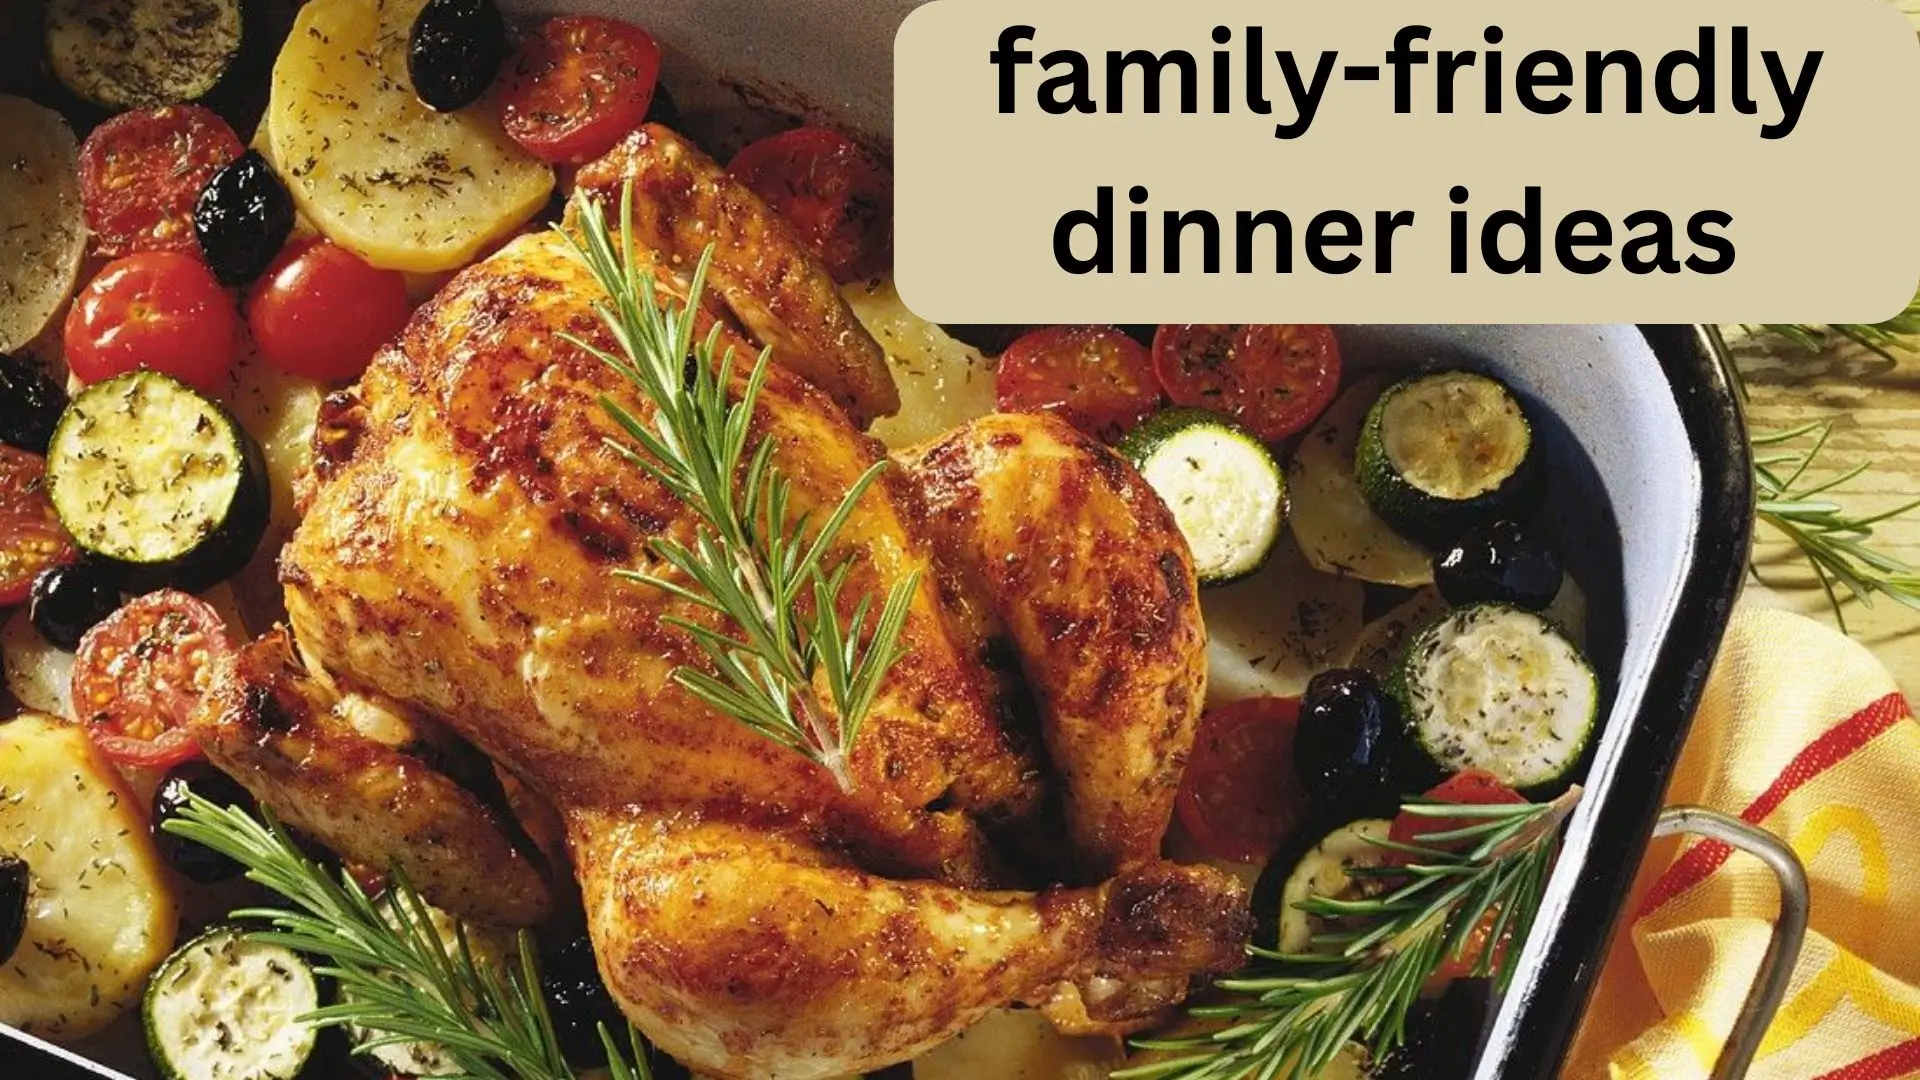 Family-Friendly Dinner Ideas: Monday Recipe for 4 Servings